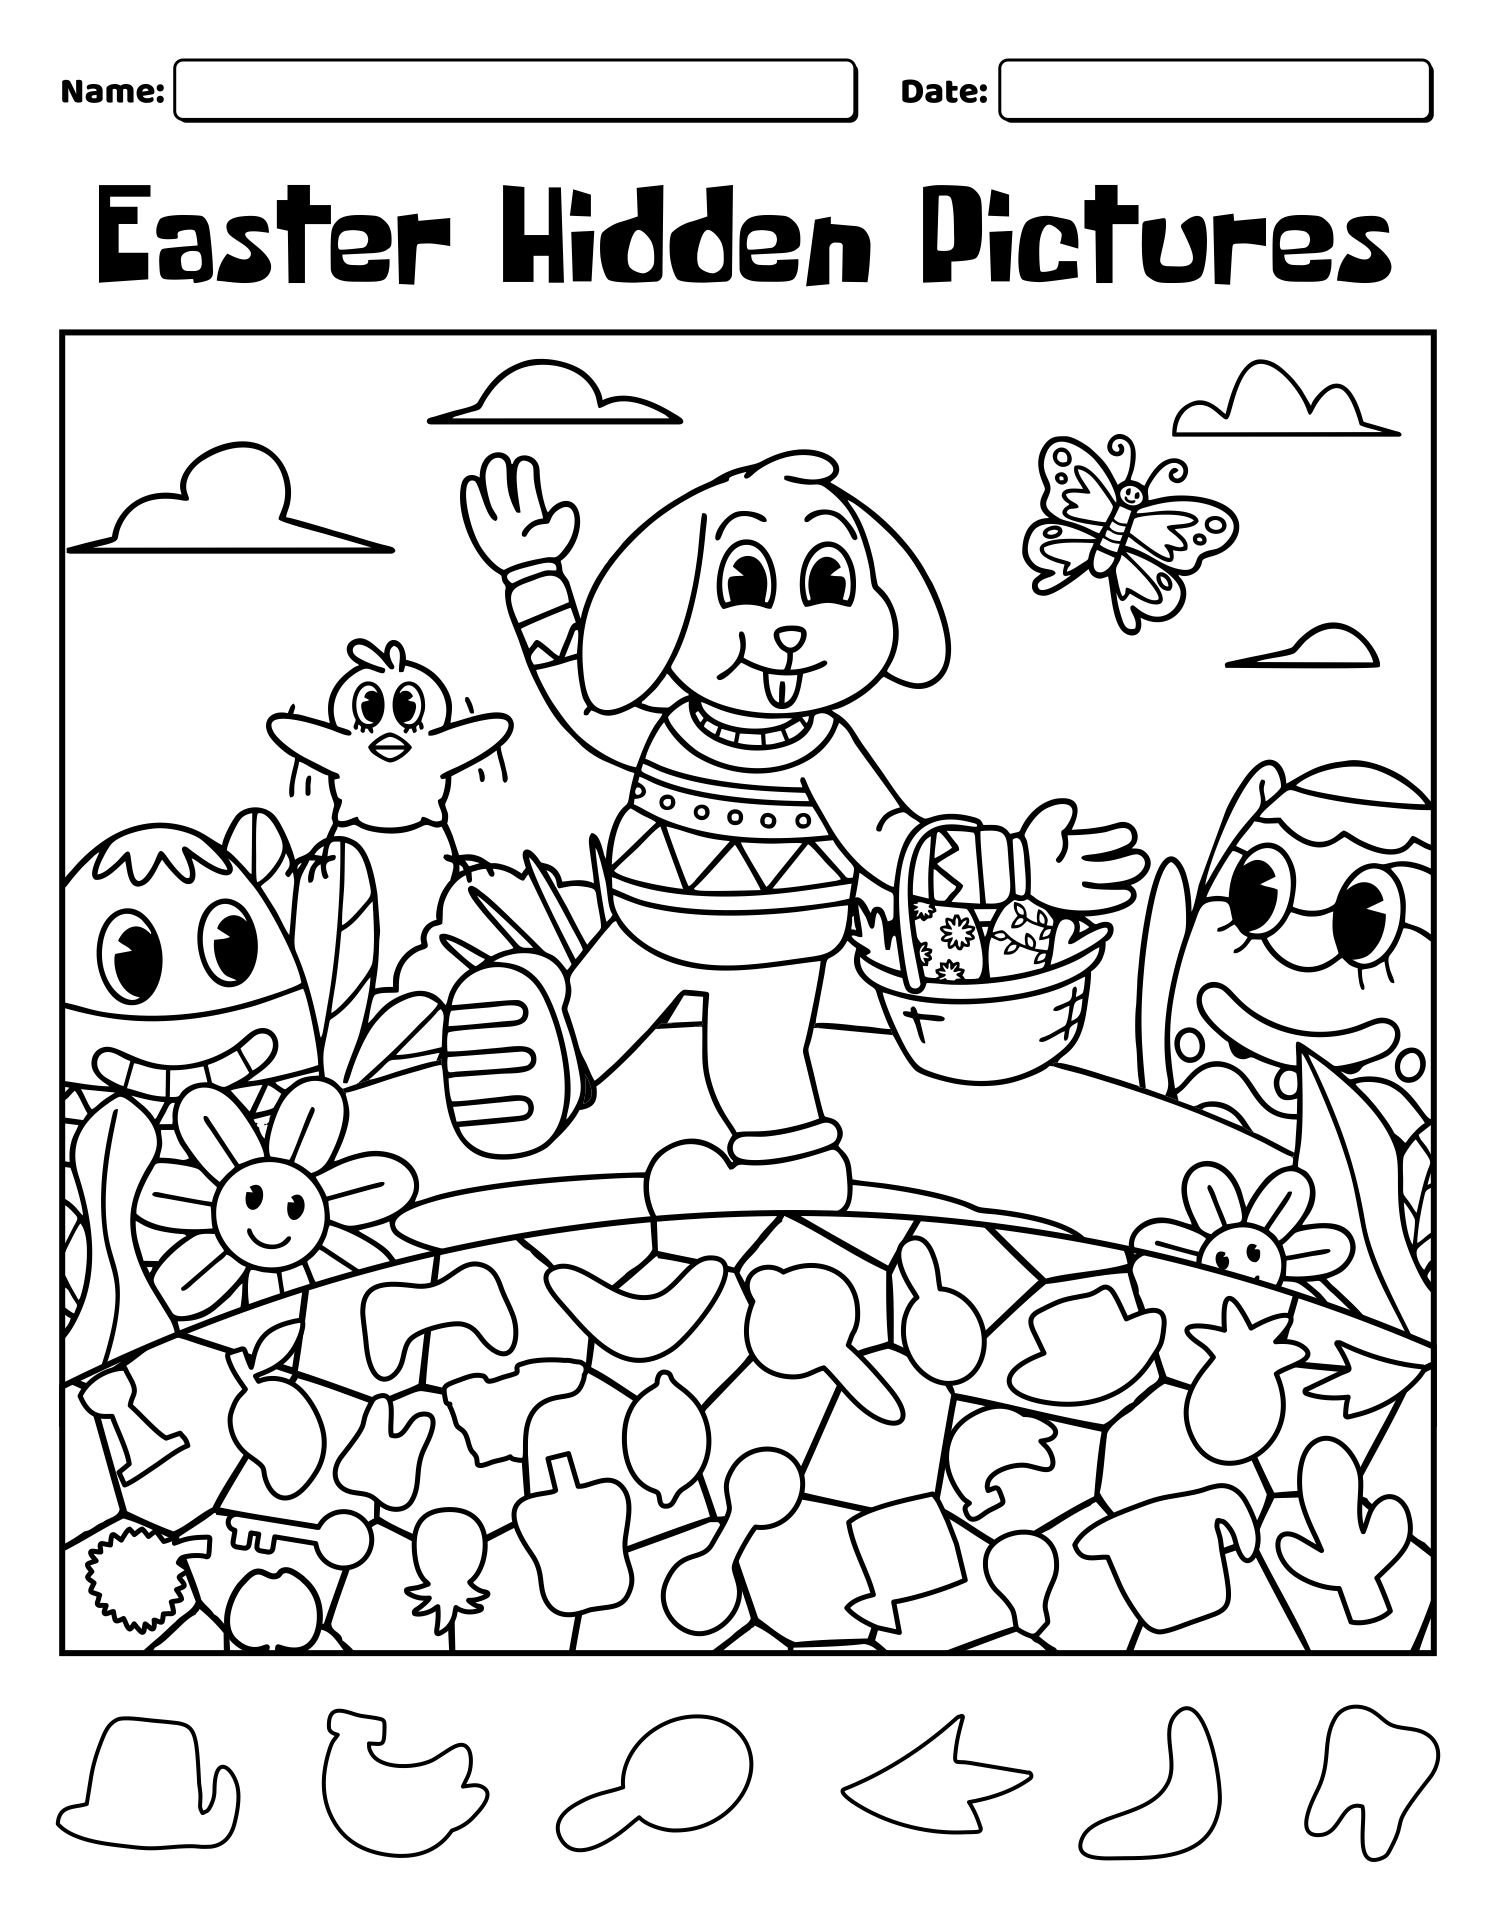 Best easter hidden pictures printables pdf for free at